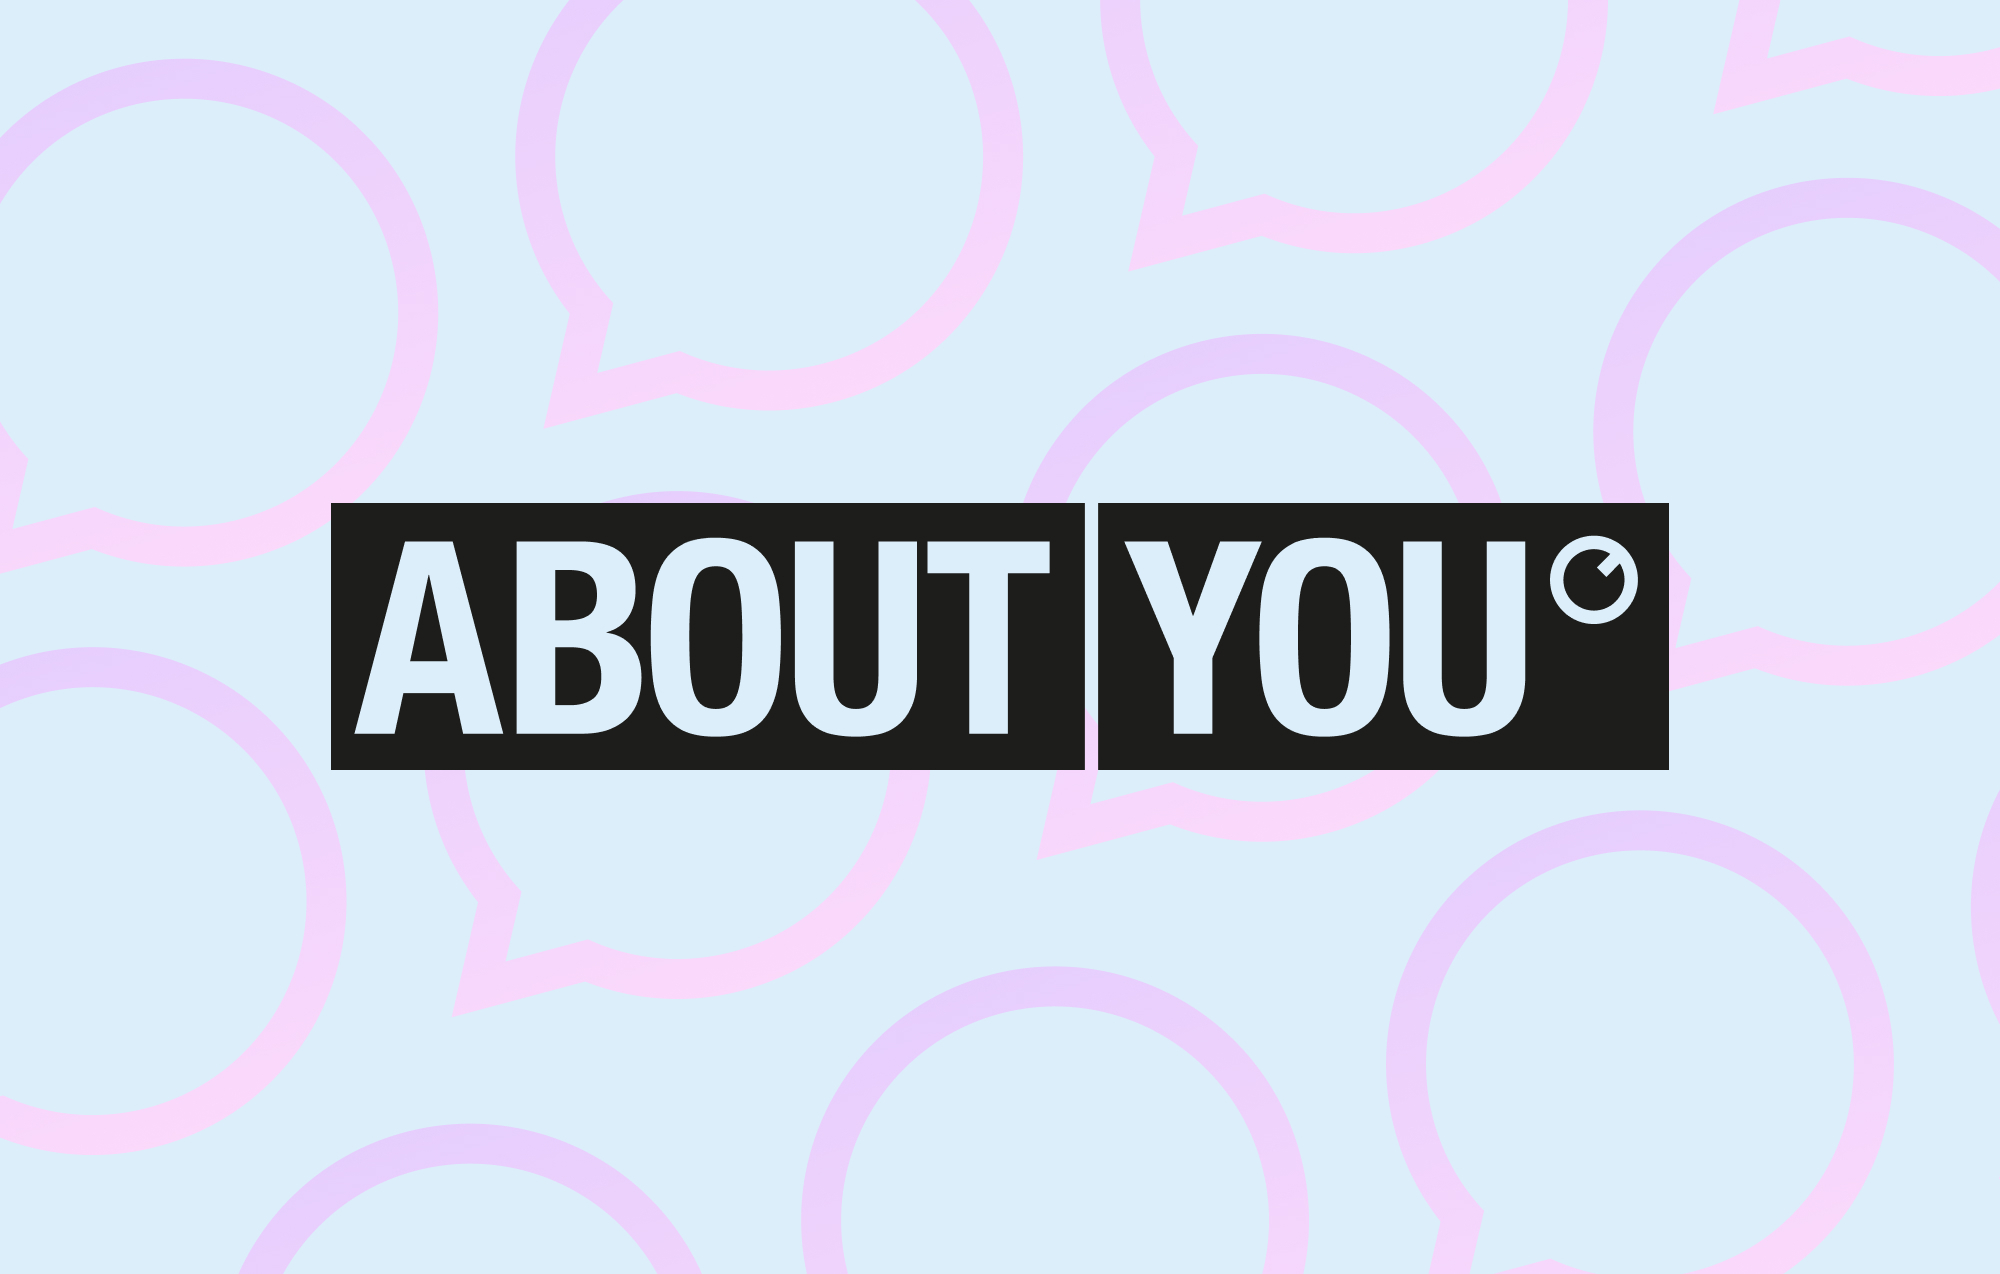 ABOUT YOU logo on a background of pink chat bubbles | charles